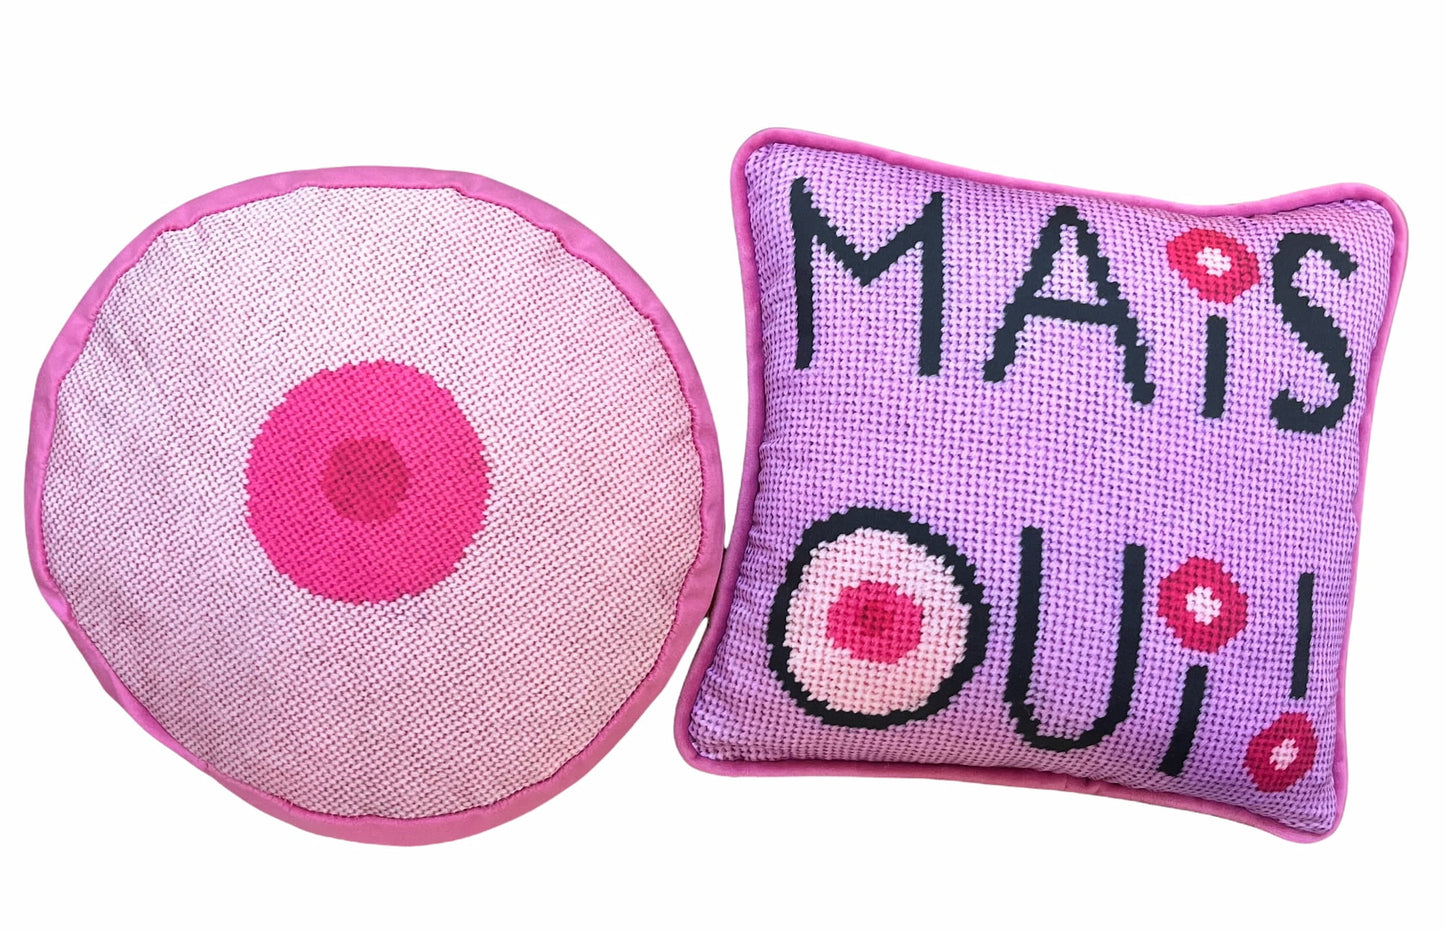  baby pink round pillow with hot pink small center and square  mais oui black stacked text with I dot and O that have cream colored centers with pink circles. Lavender pink background.